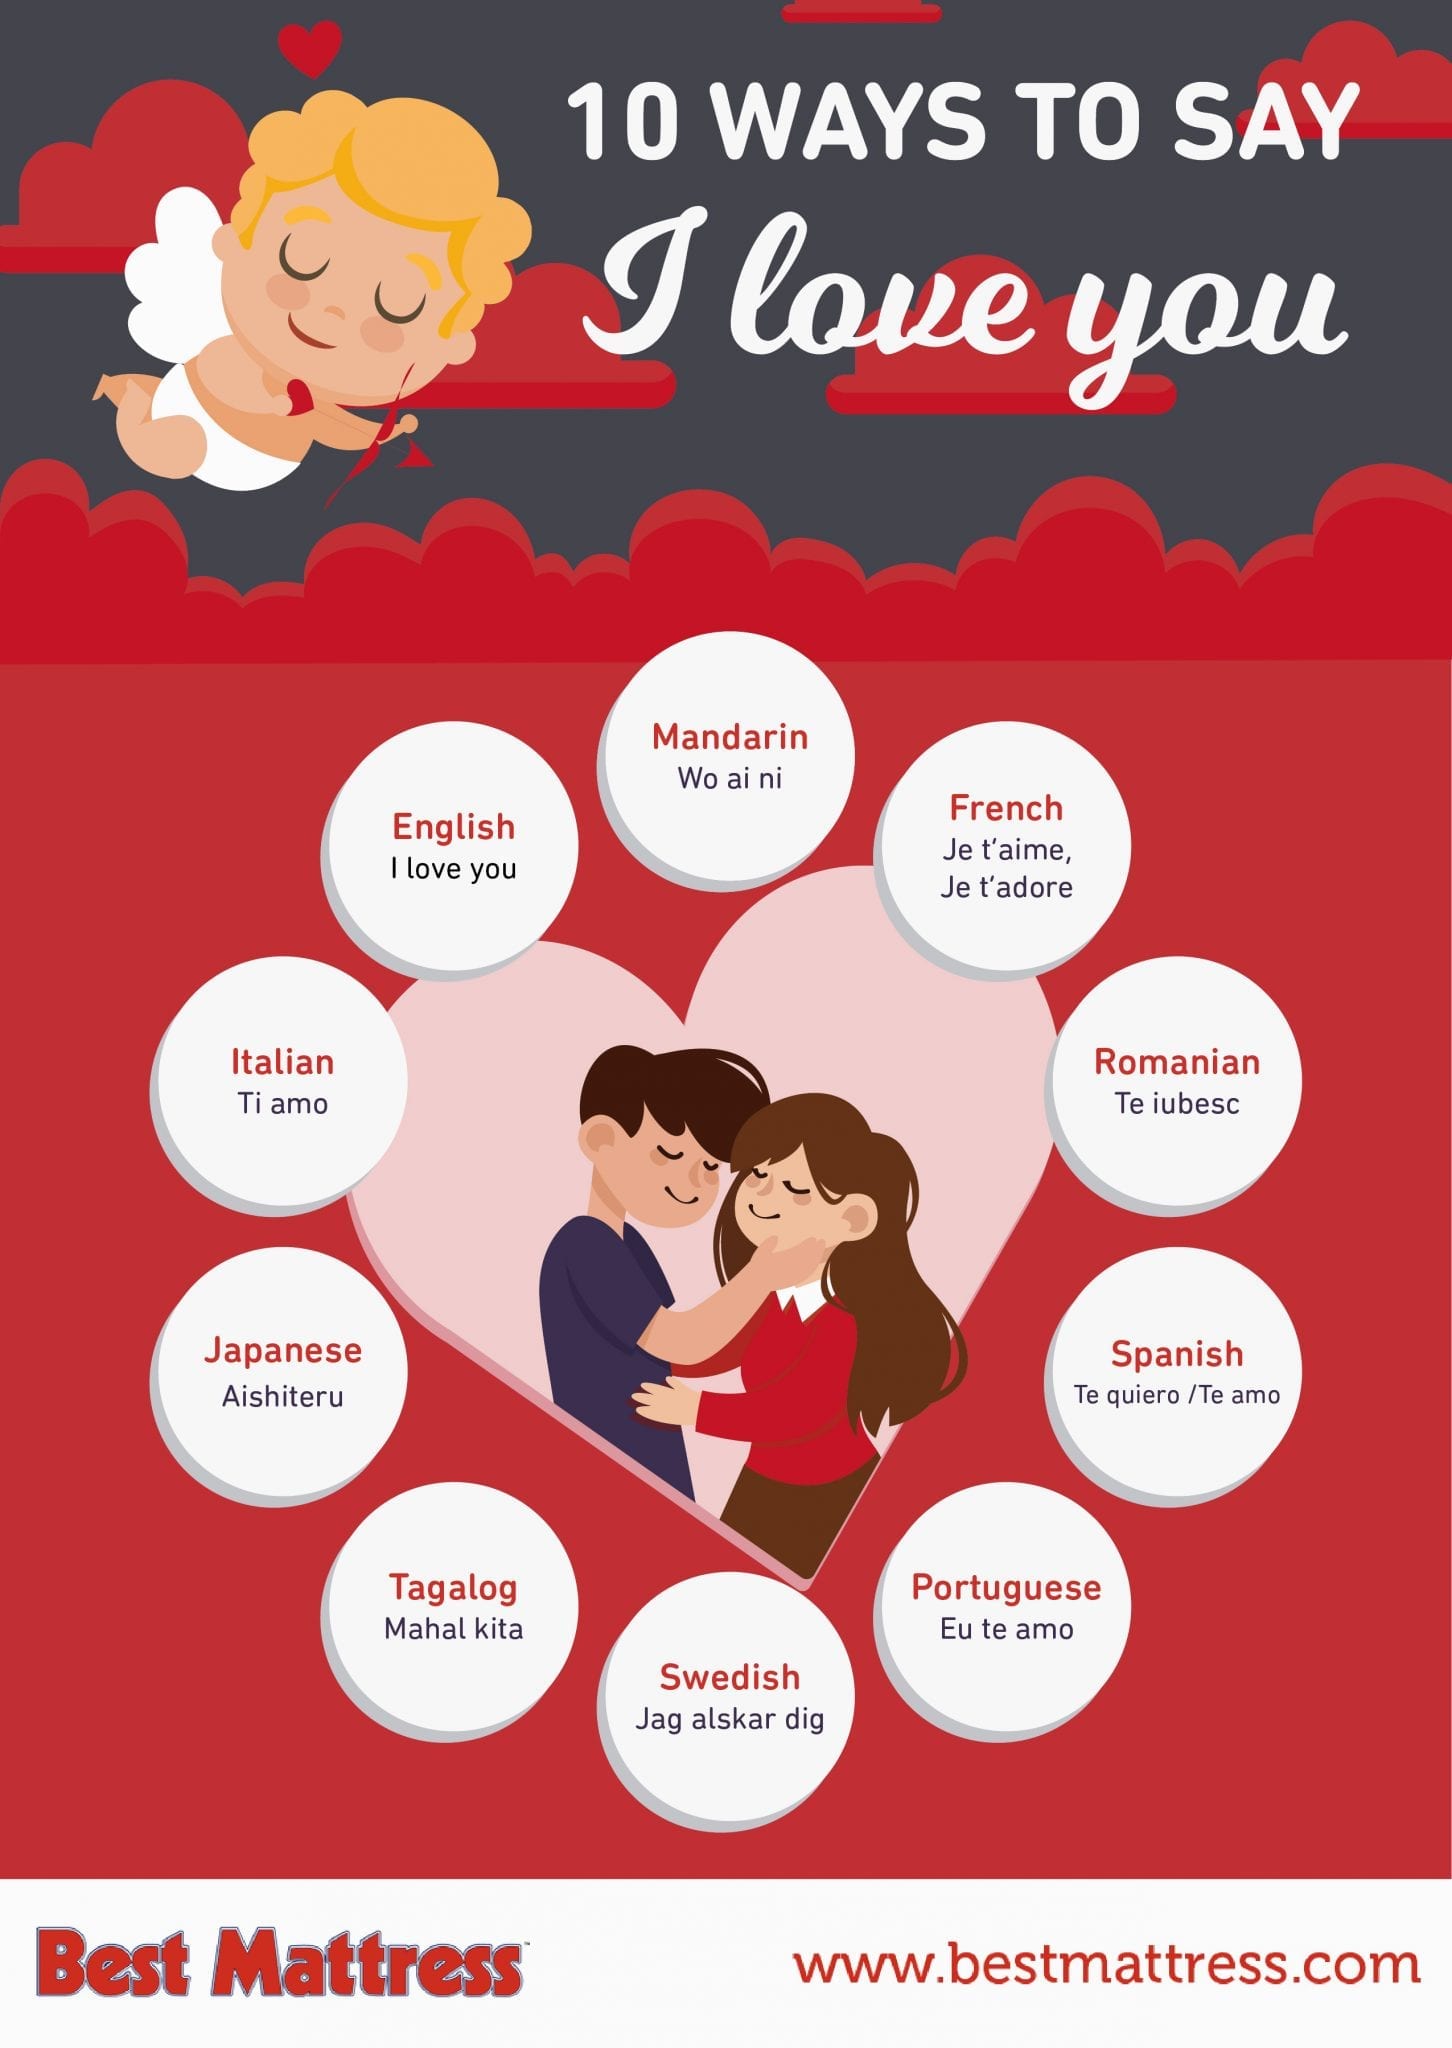 3 Ways To Say I Love You In Portuguese